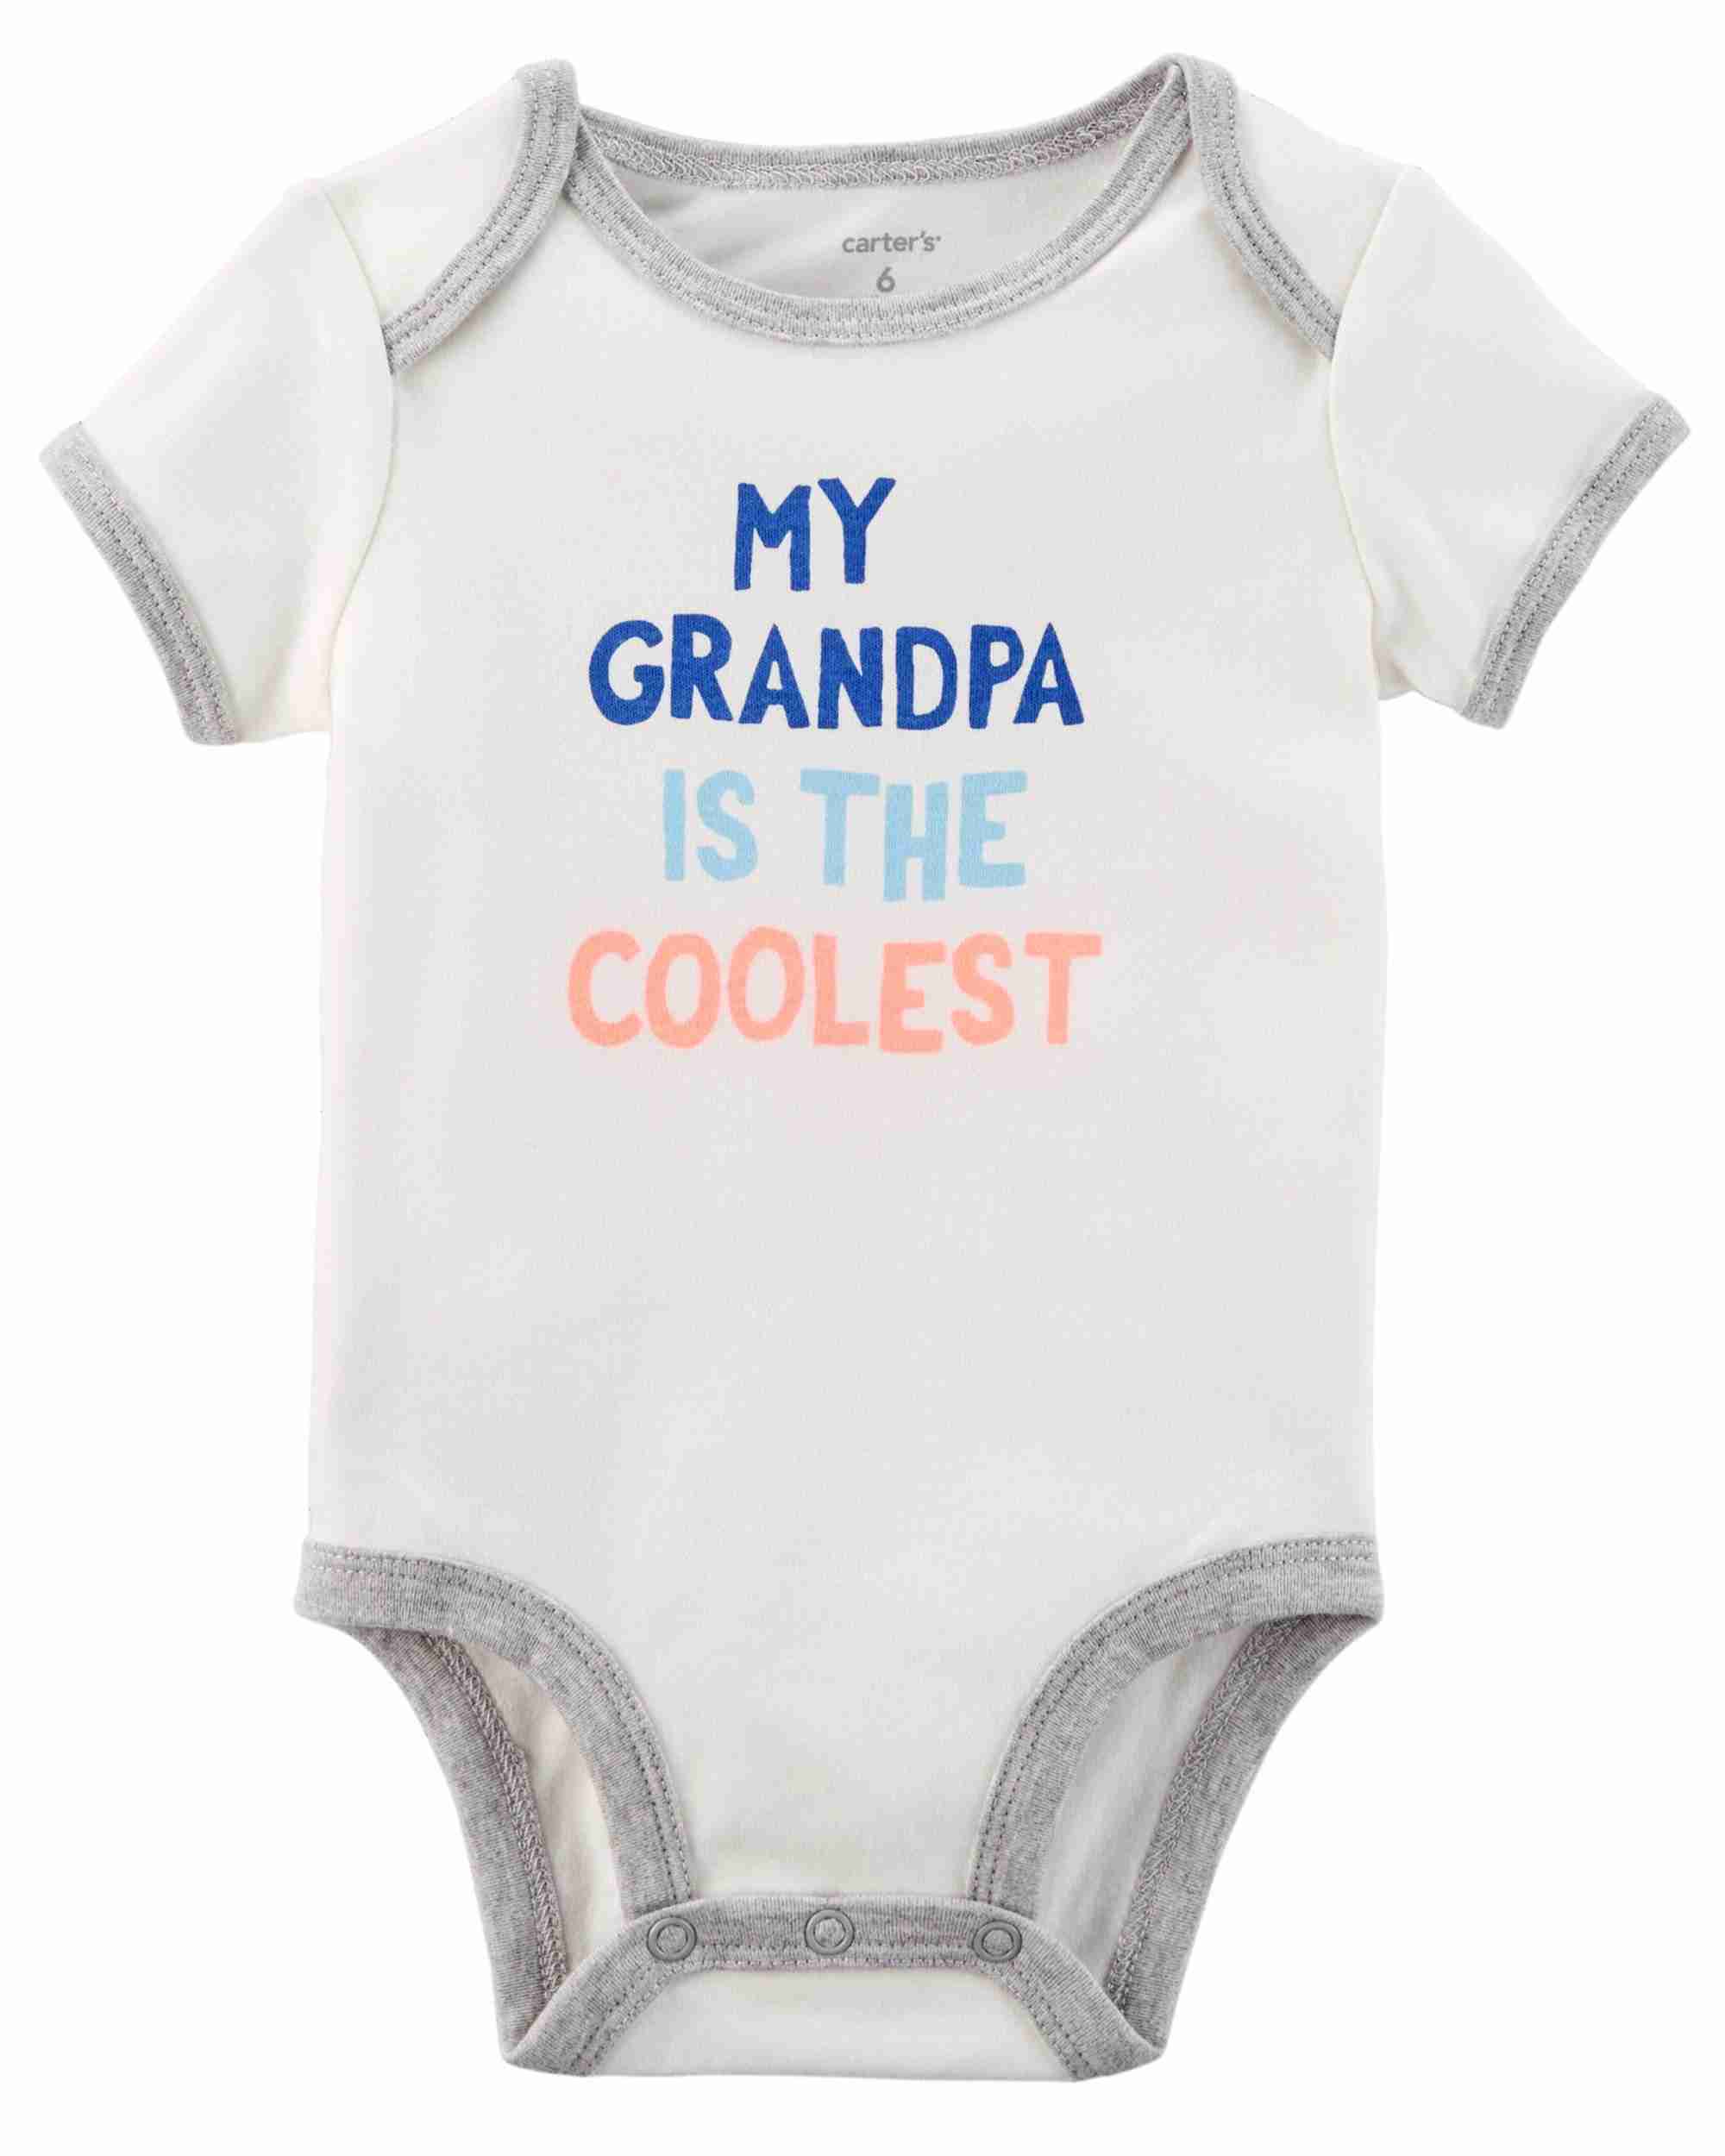 Grandpa Is The Coolest Collectible Bodysuit